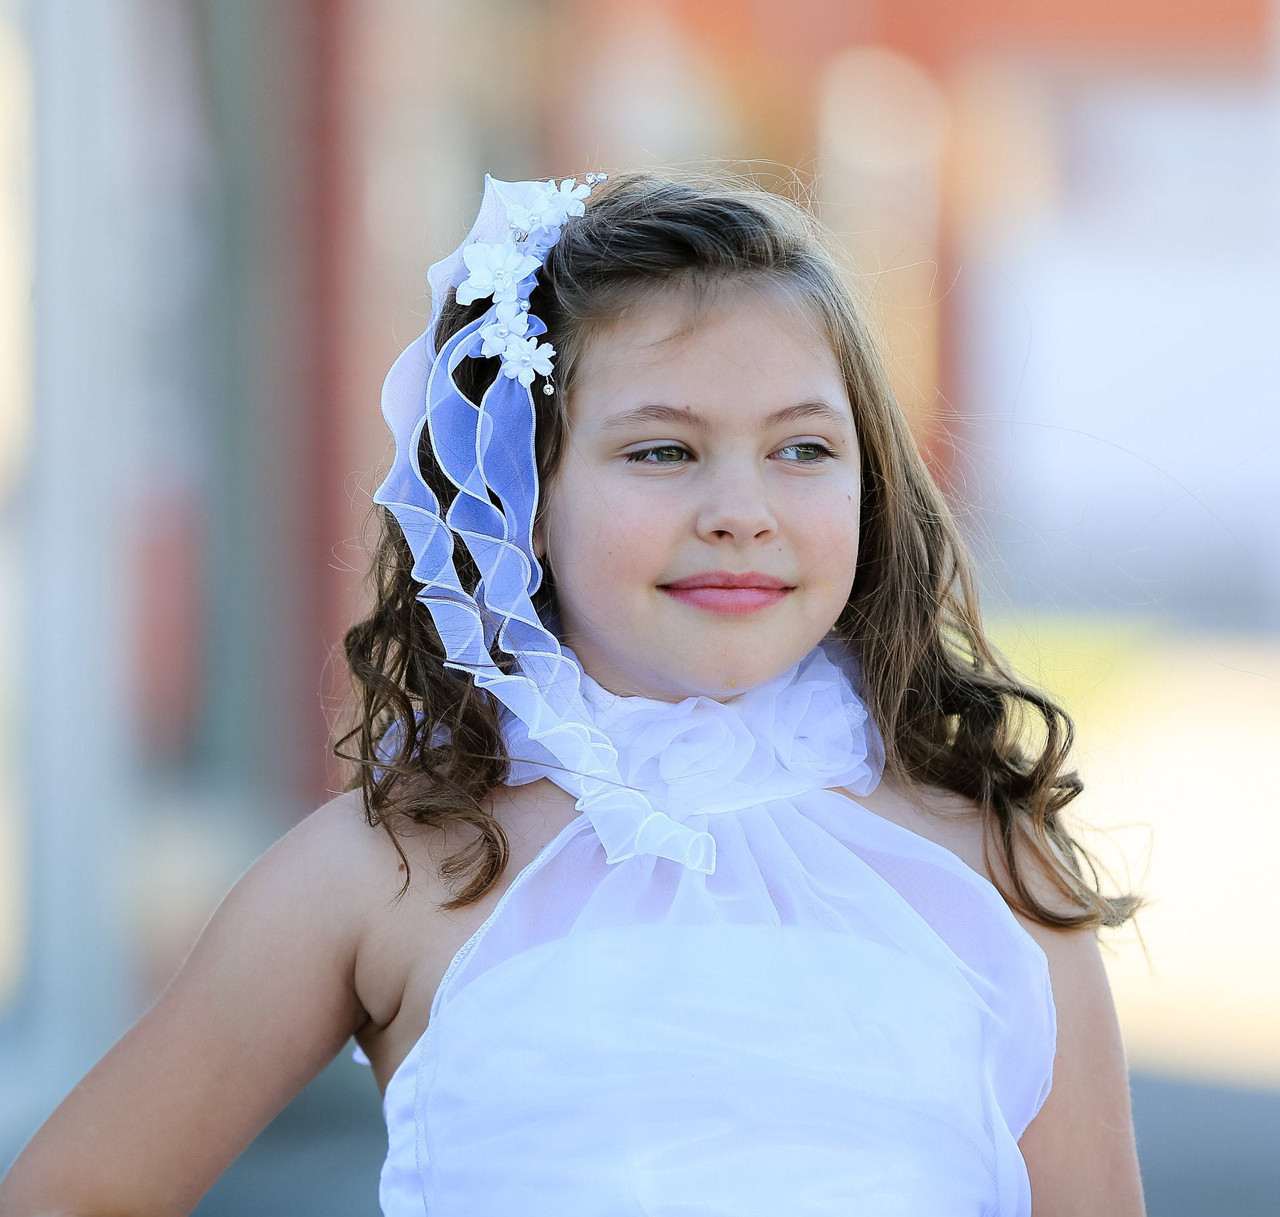 White Floral Comb With Ruffle Streamers - Communion Headpiece, White Floral Hair Comb, 1st Communion, Flower Girl, Special Occasion